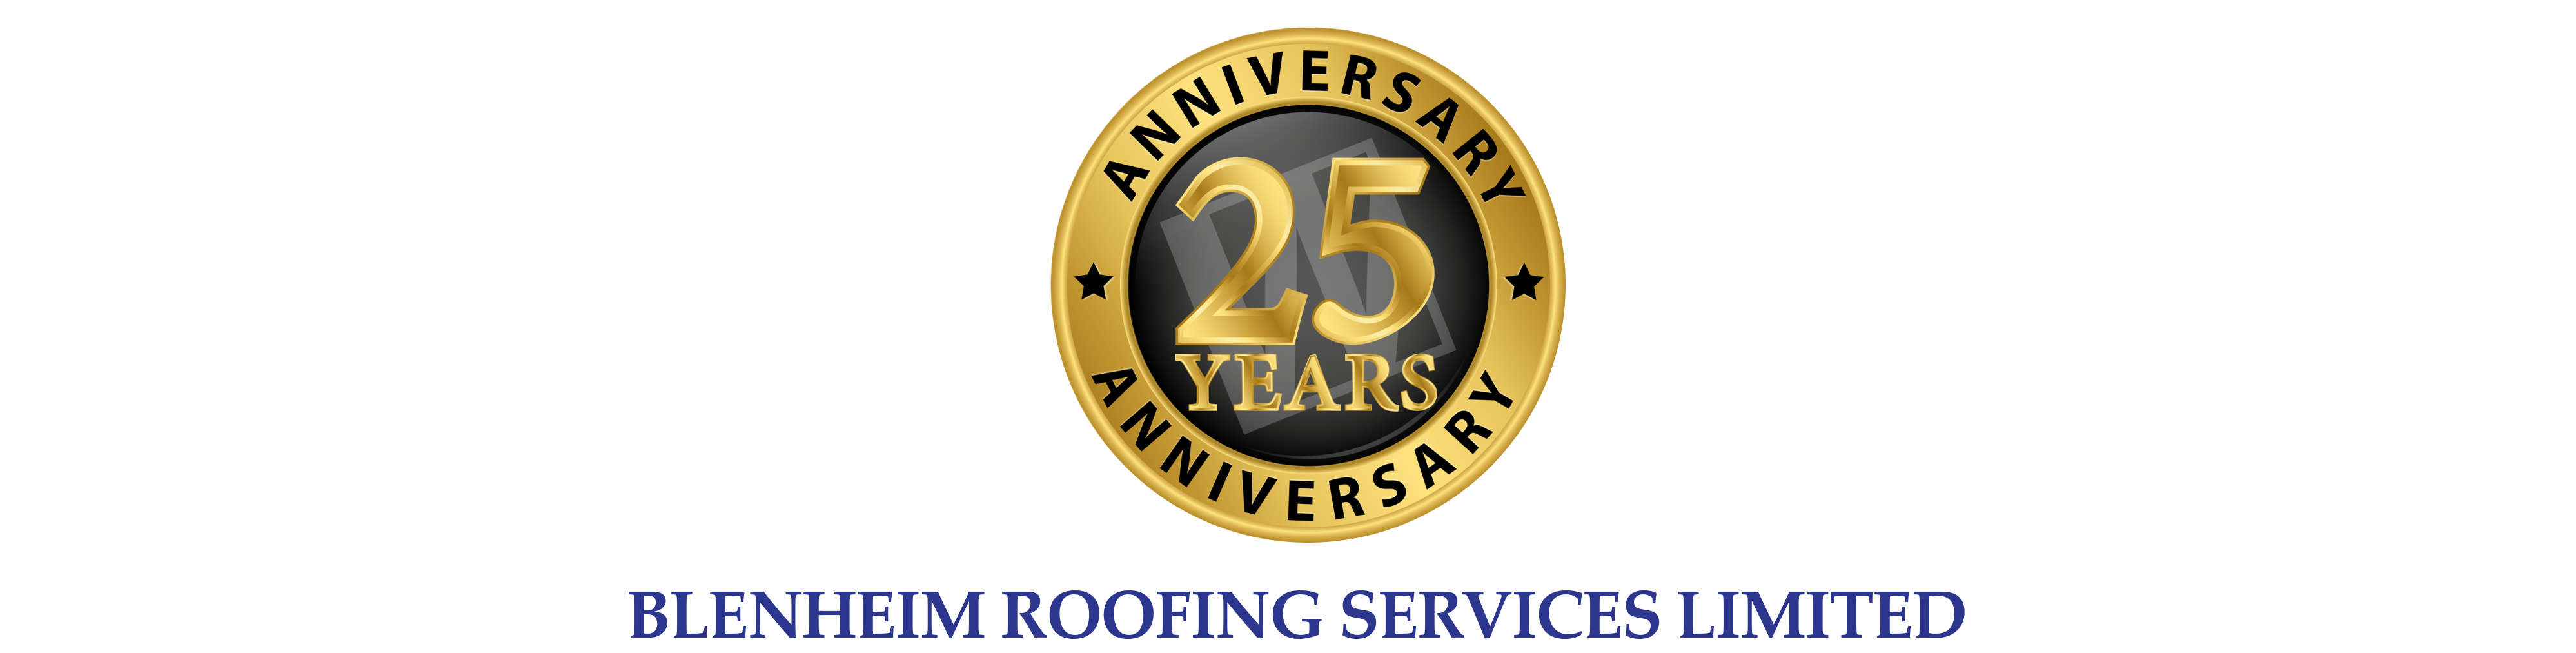 Blenheim Roofing Services Limited